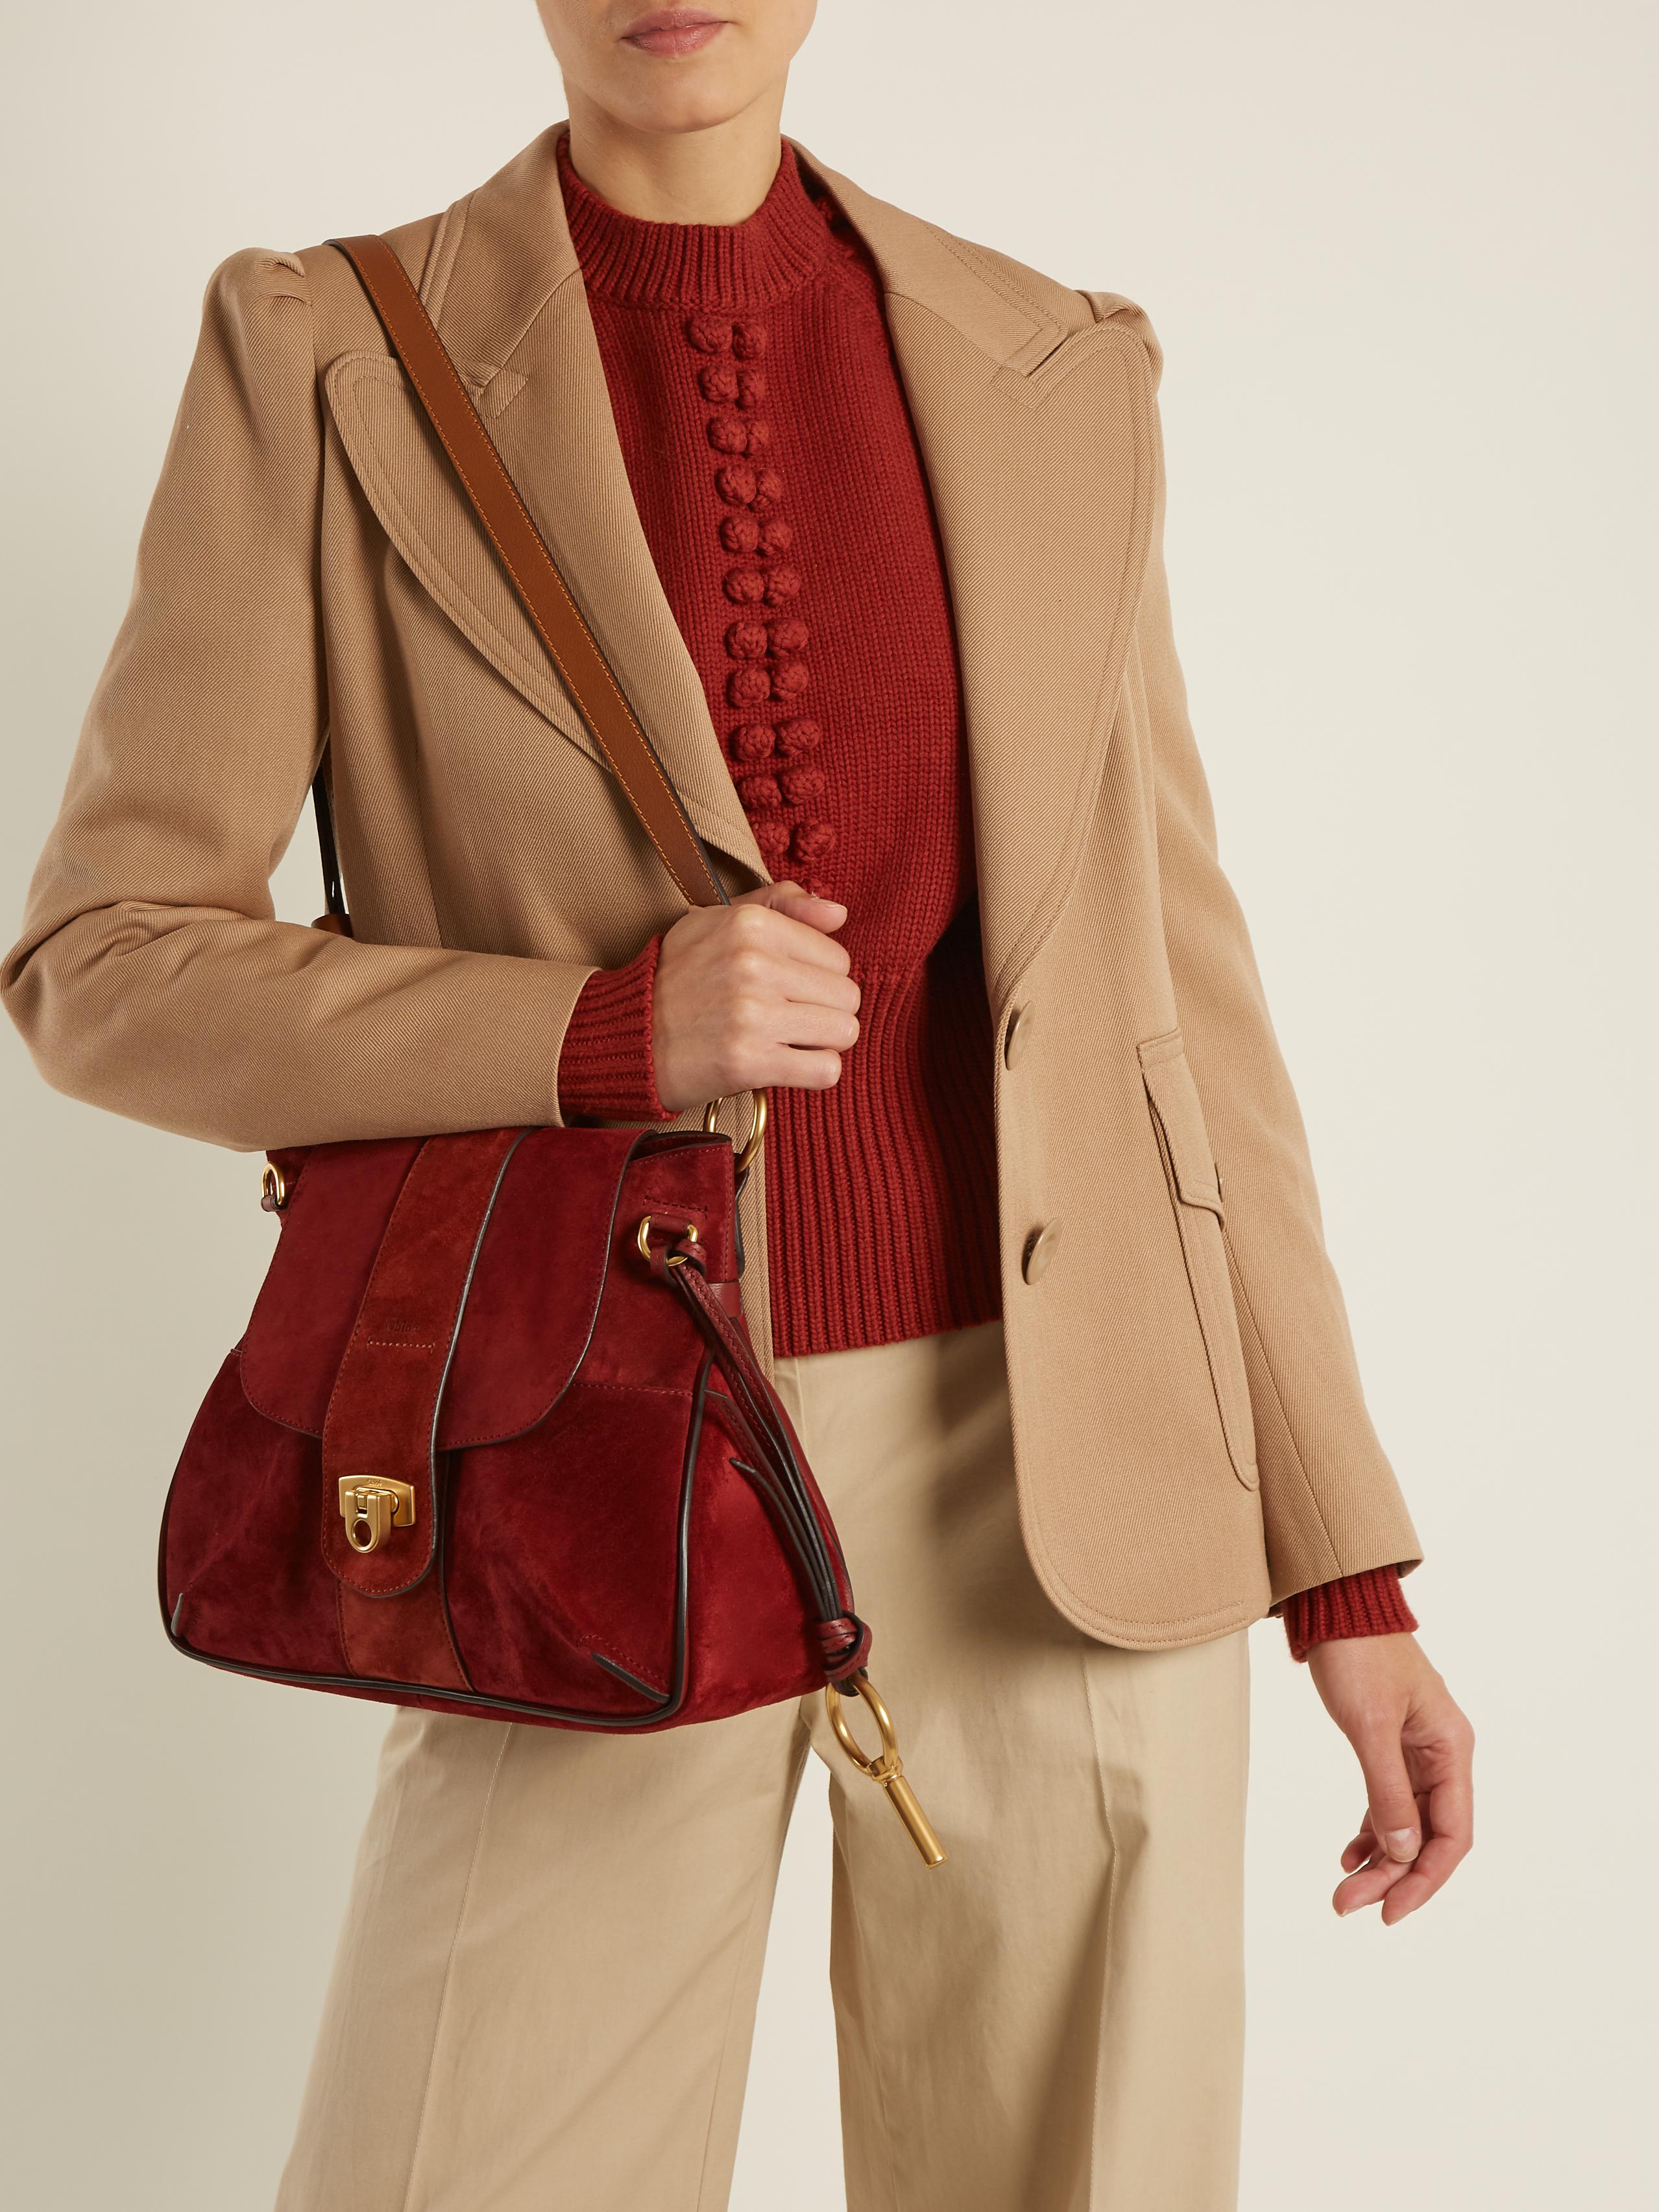 Chloé Lexa Small Suede Shoulder Bag in Red | Lyst